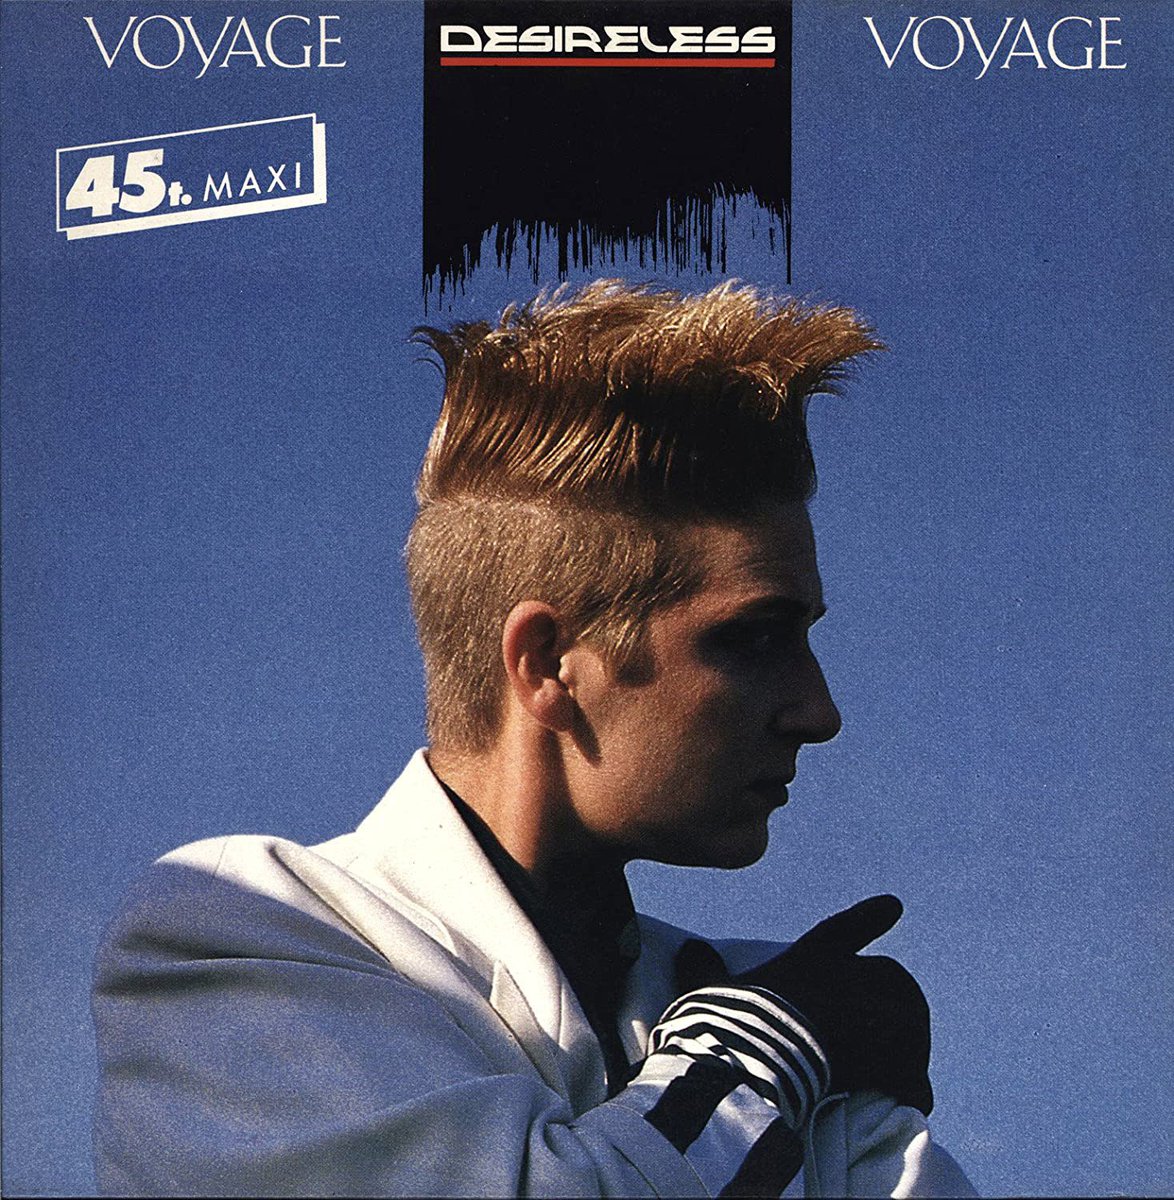 #OnThisDay80s 1988

Desireless - Voyage Voyage

For @weirzone 
@PopMusicJimmy 
@labelladonna75 
@TheBowers78 
Steve R
James

CHOOSE your REQUESTS & how to LISTEN to the show at OnThisDay80s.co.uk